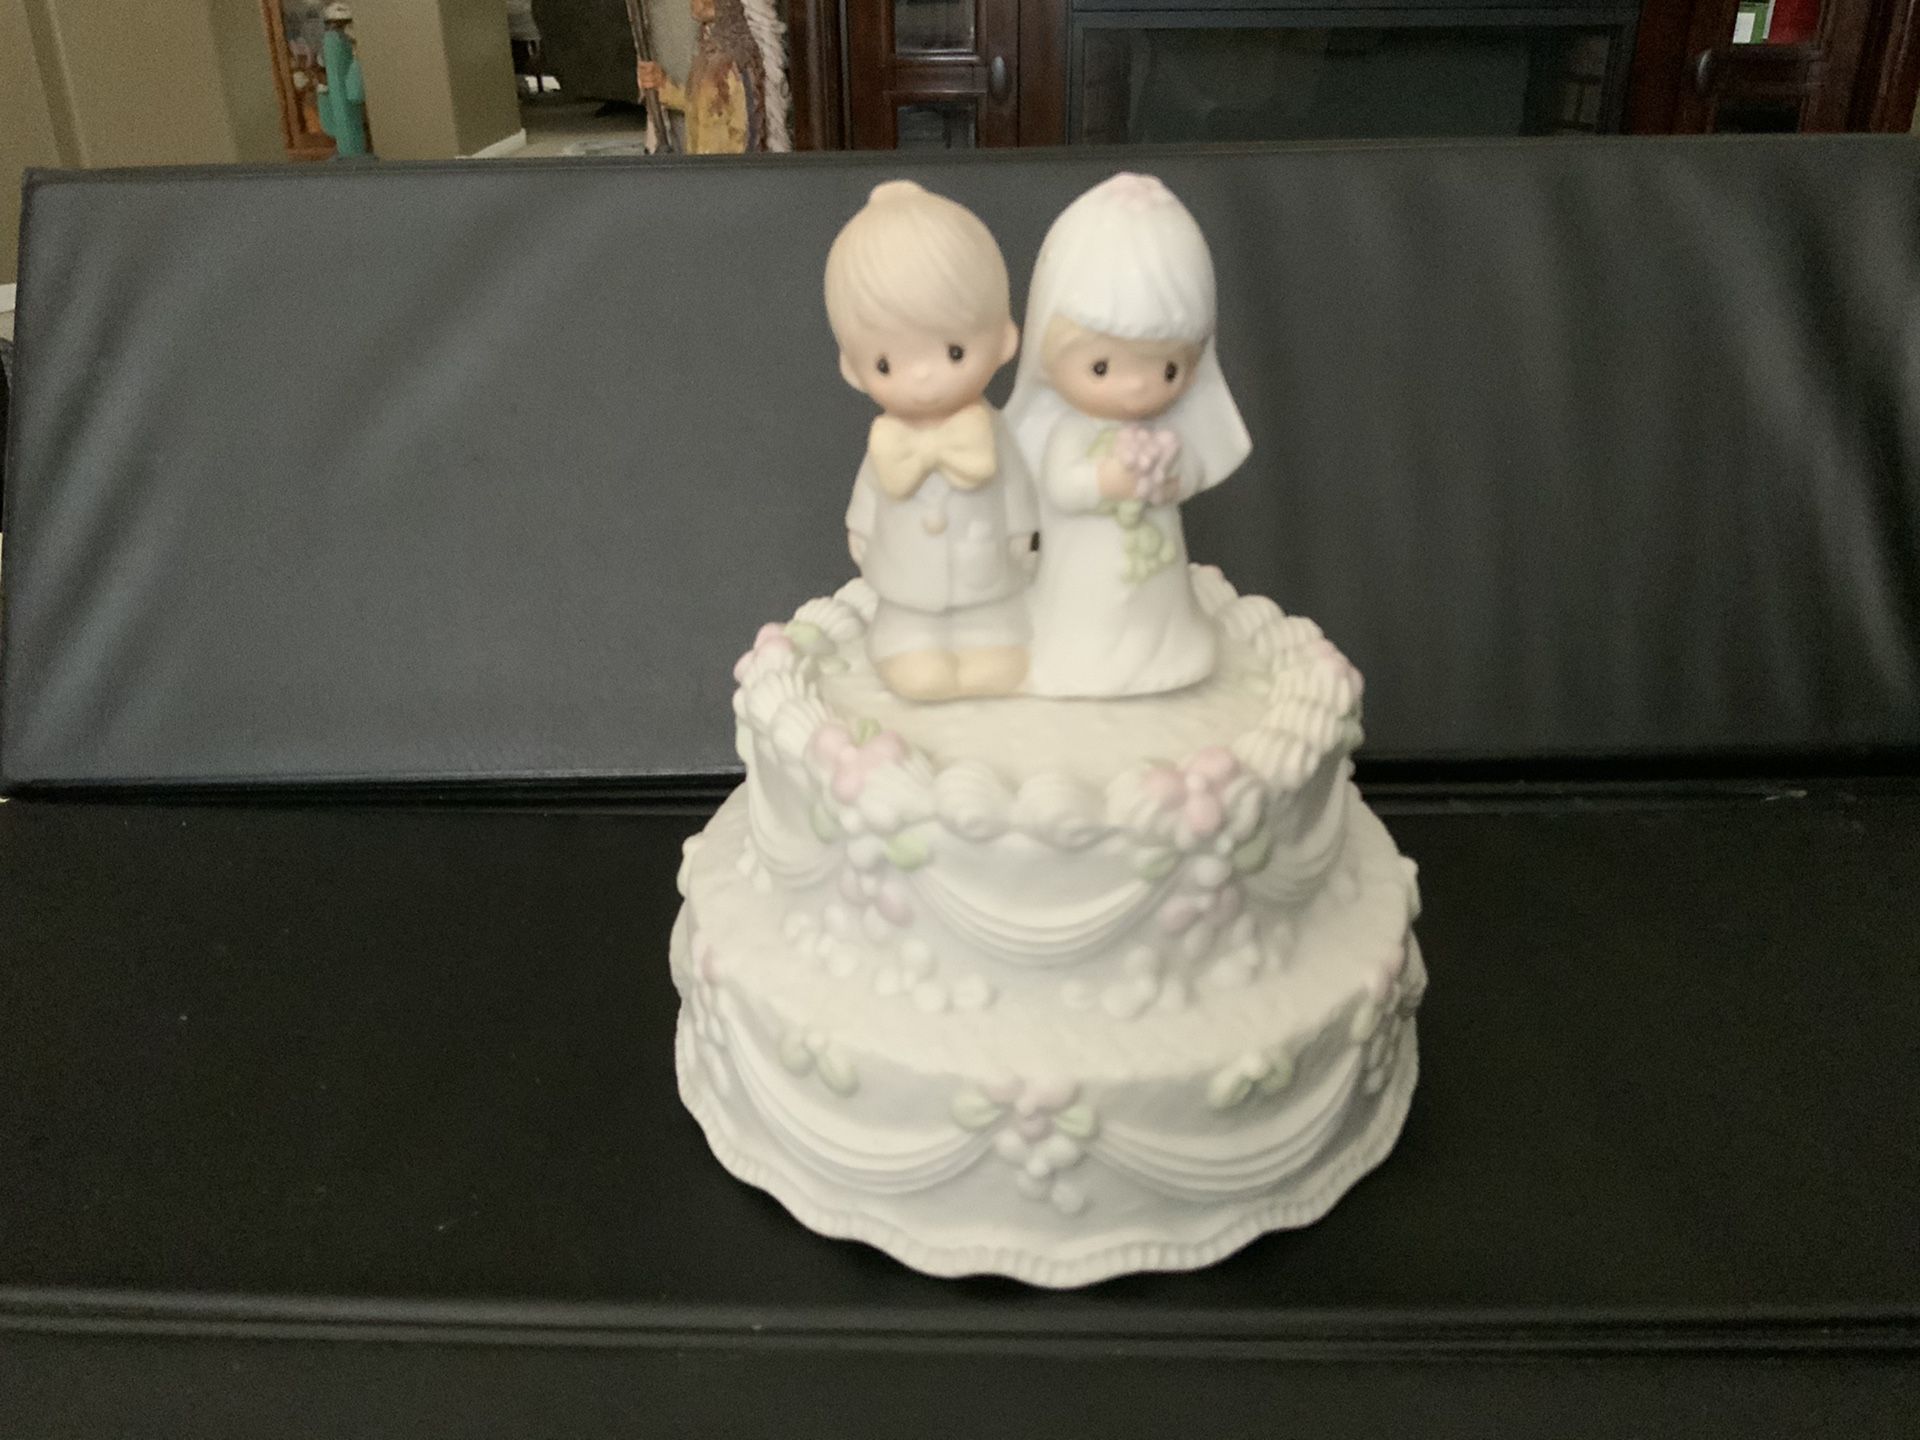 1981 PRECIOUS MOMENTS MUSICAL WEDDING CAKE FIGURINE JOHNATHON & DAVID, ENESCO " THE LORD BLESS AND KEEP YOU " PLAYS THE WEDDING MARCH 6 1/2 " X 5 1/2